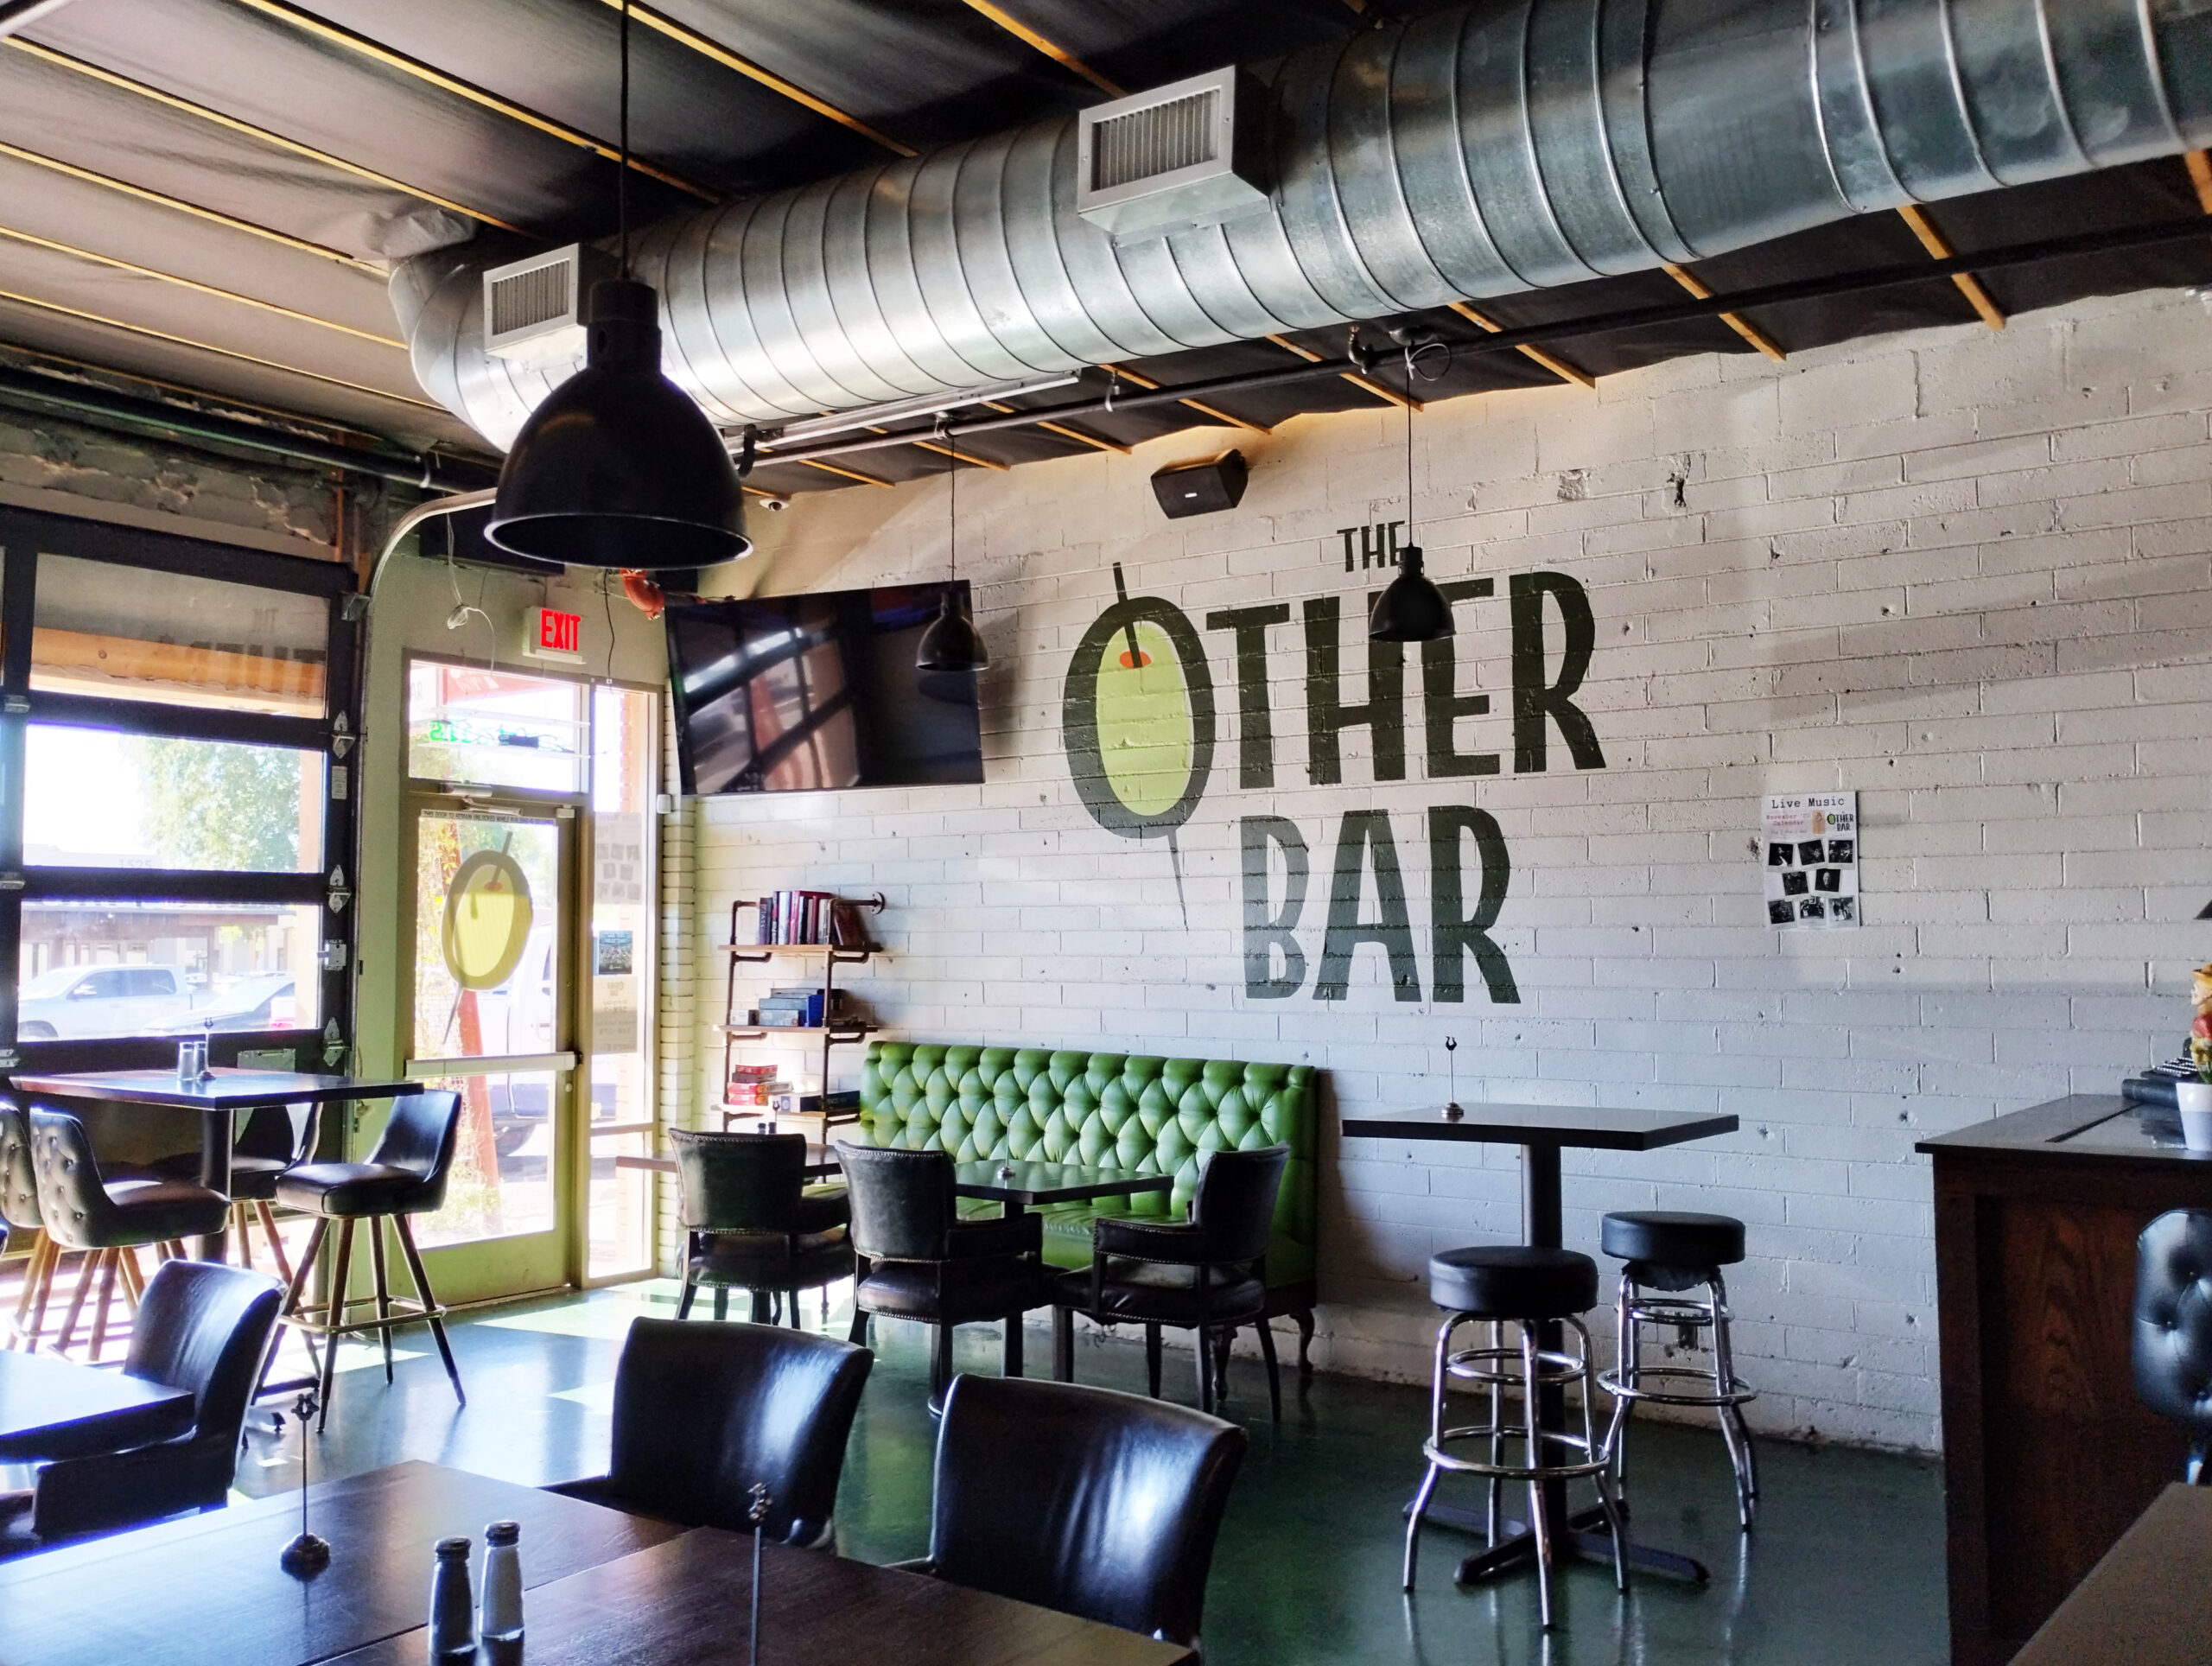 Other Bar launches open mic night